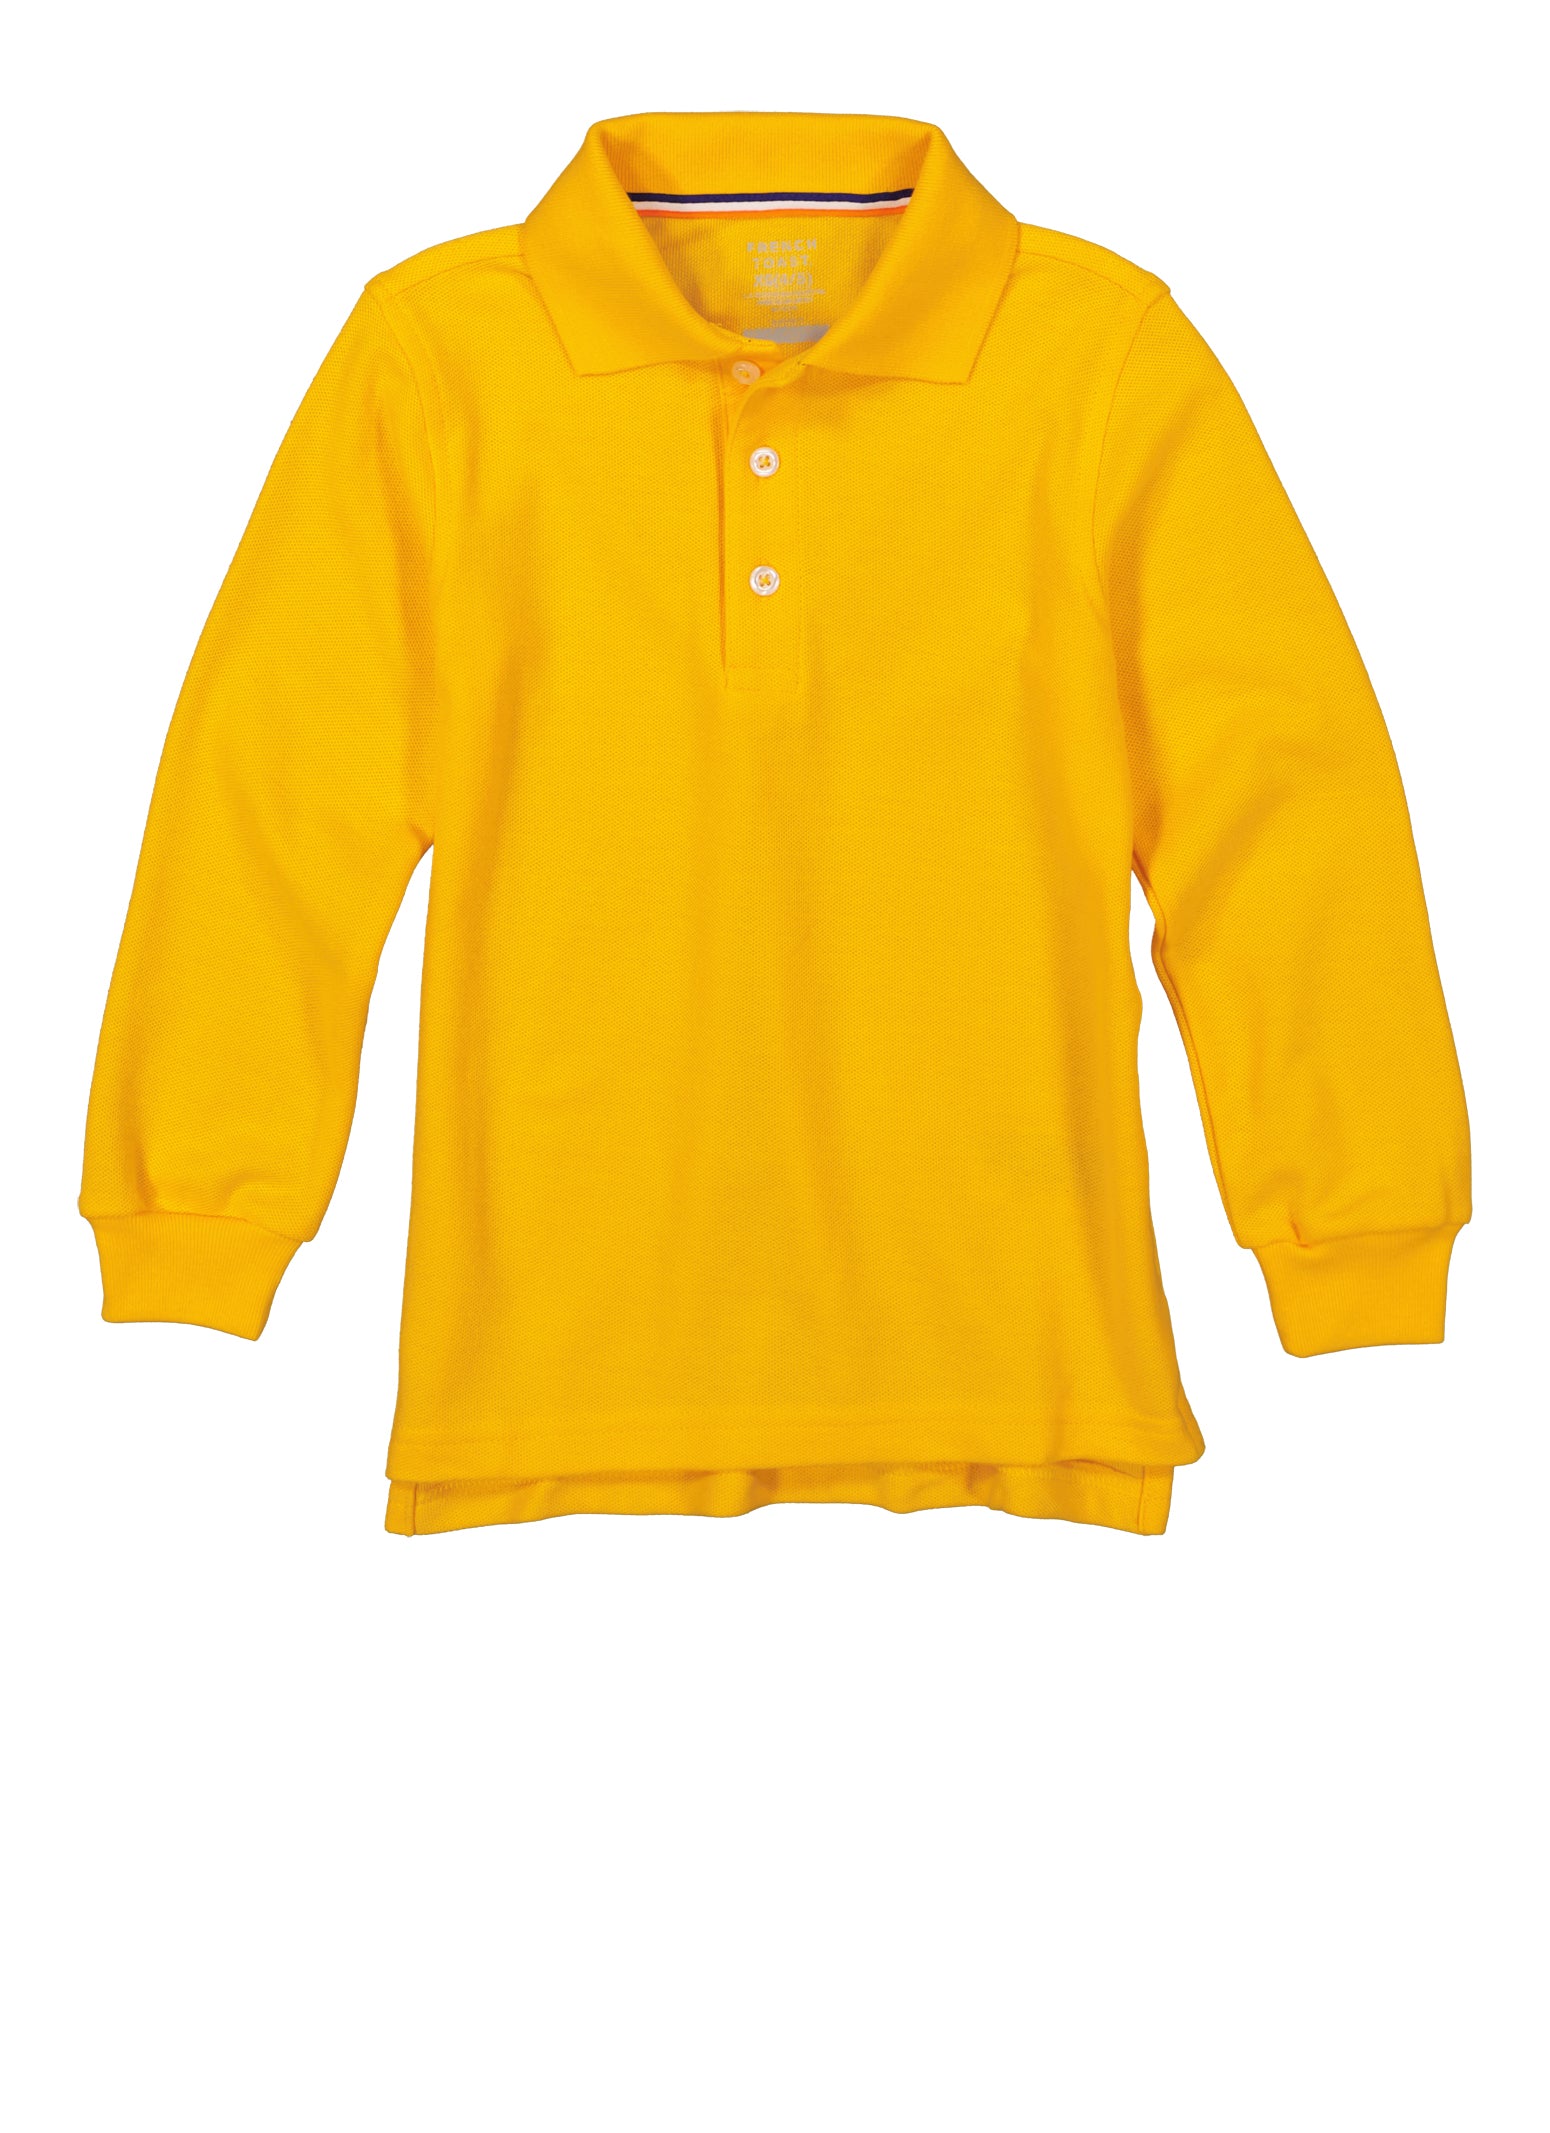 French Toast Boys 4-7 Solid Long Sleeve Polo Shirt, Yellow, Size 4-5